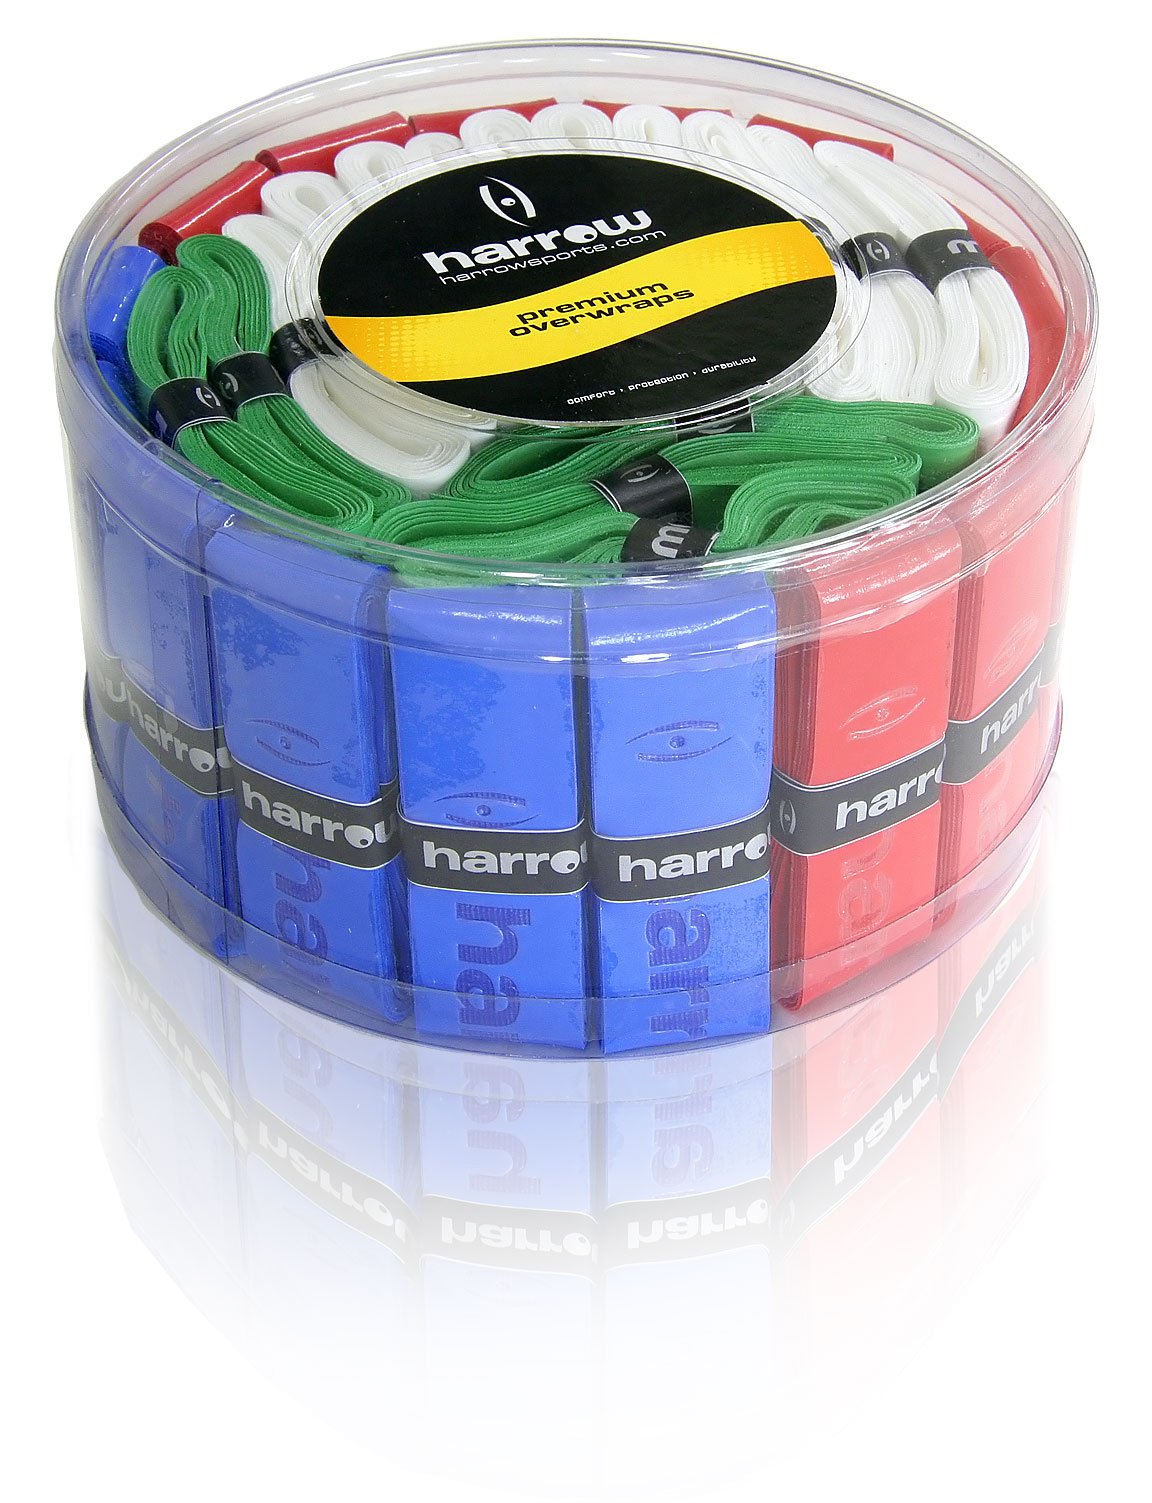 Over Wrap Grip Container with 60 Assorted Colors - Harrow Sports